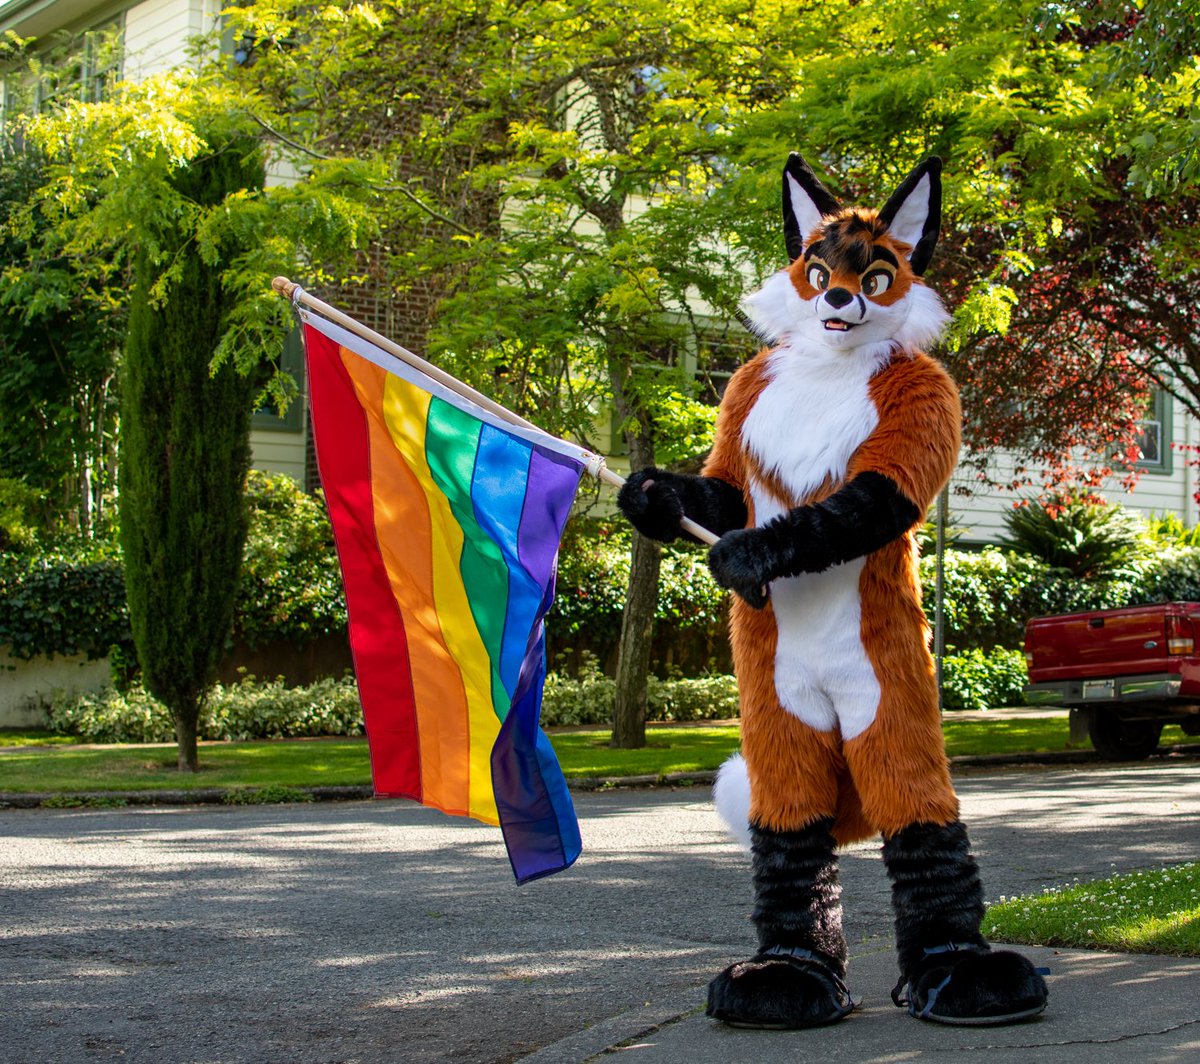 It might be the end of #PrideMonth, but not the end of pride. Stay proud and stay you! 🌈 #Pride #PrideMonth2020